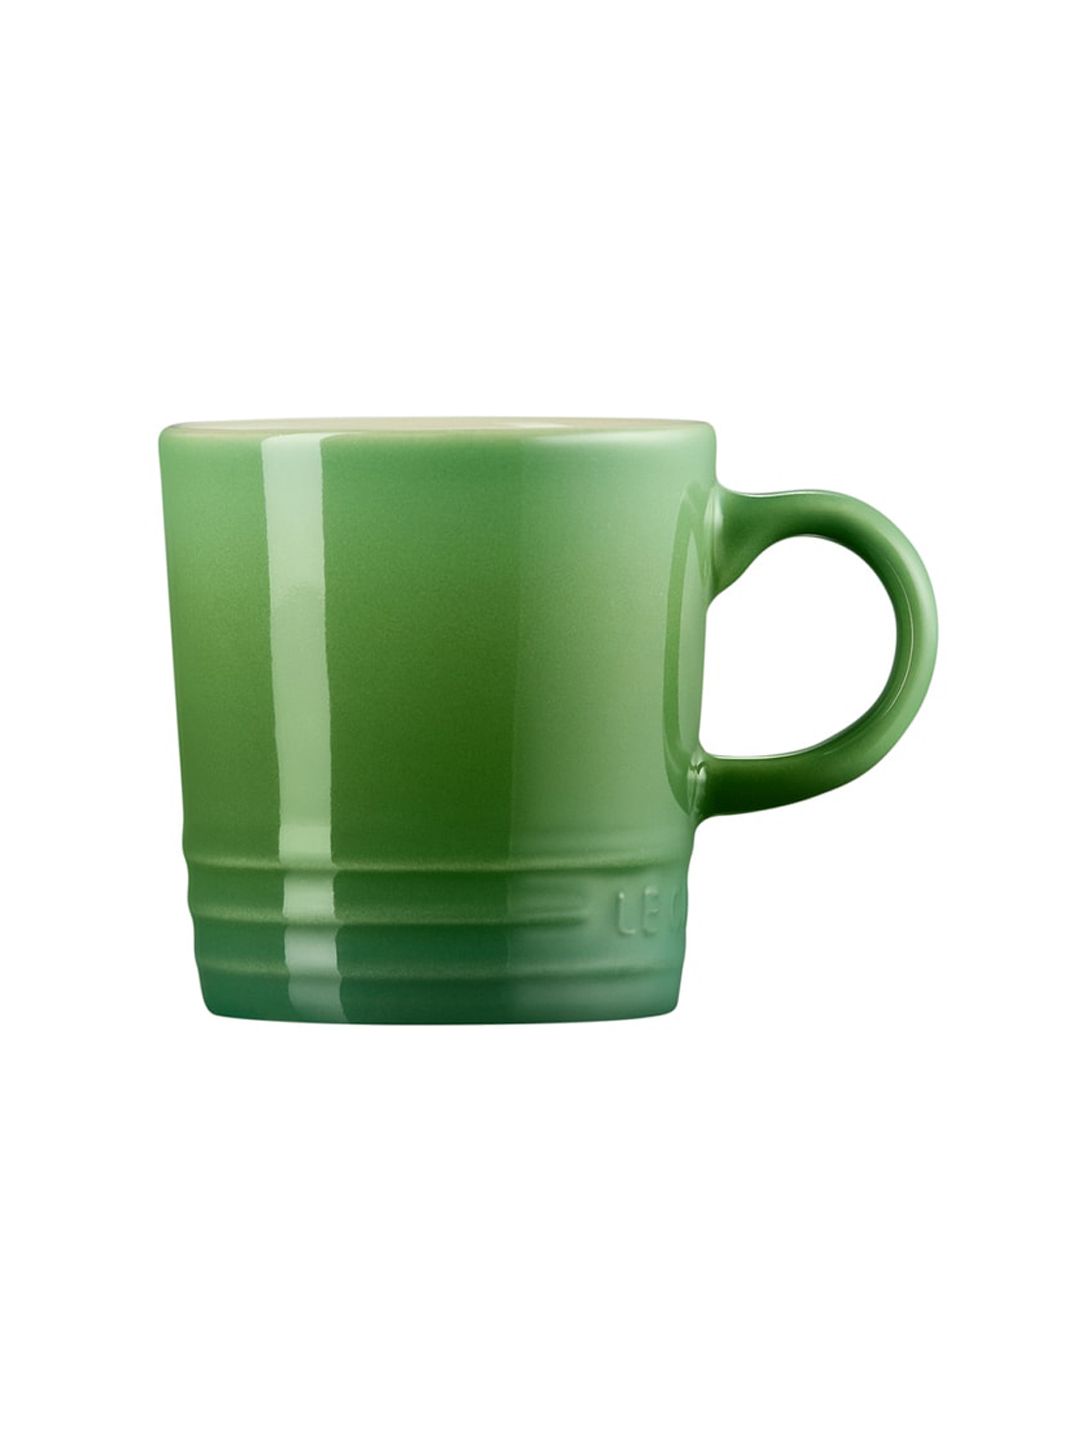 LE CREUSET Green Solid Stoneware Glossy Mug Price in India